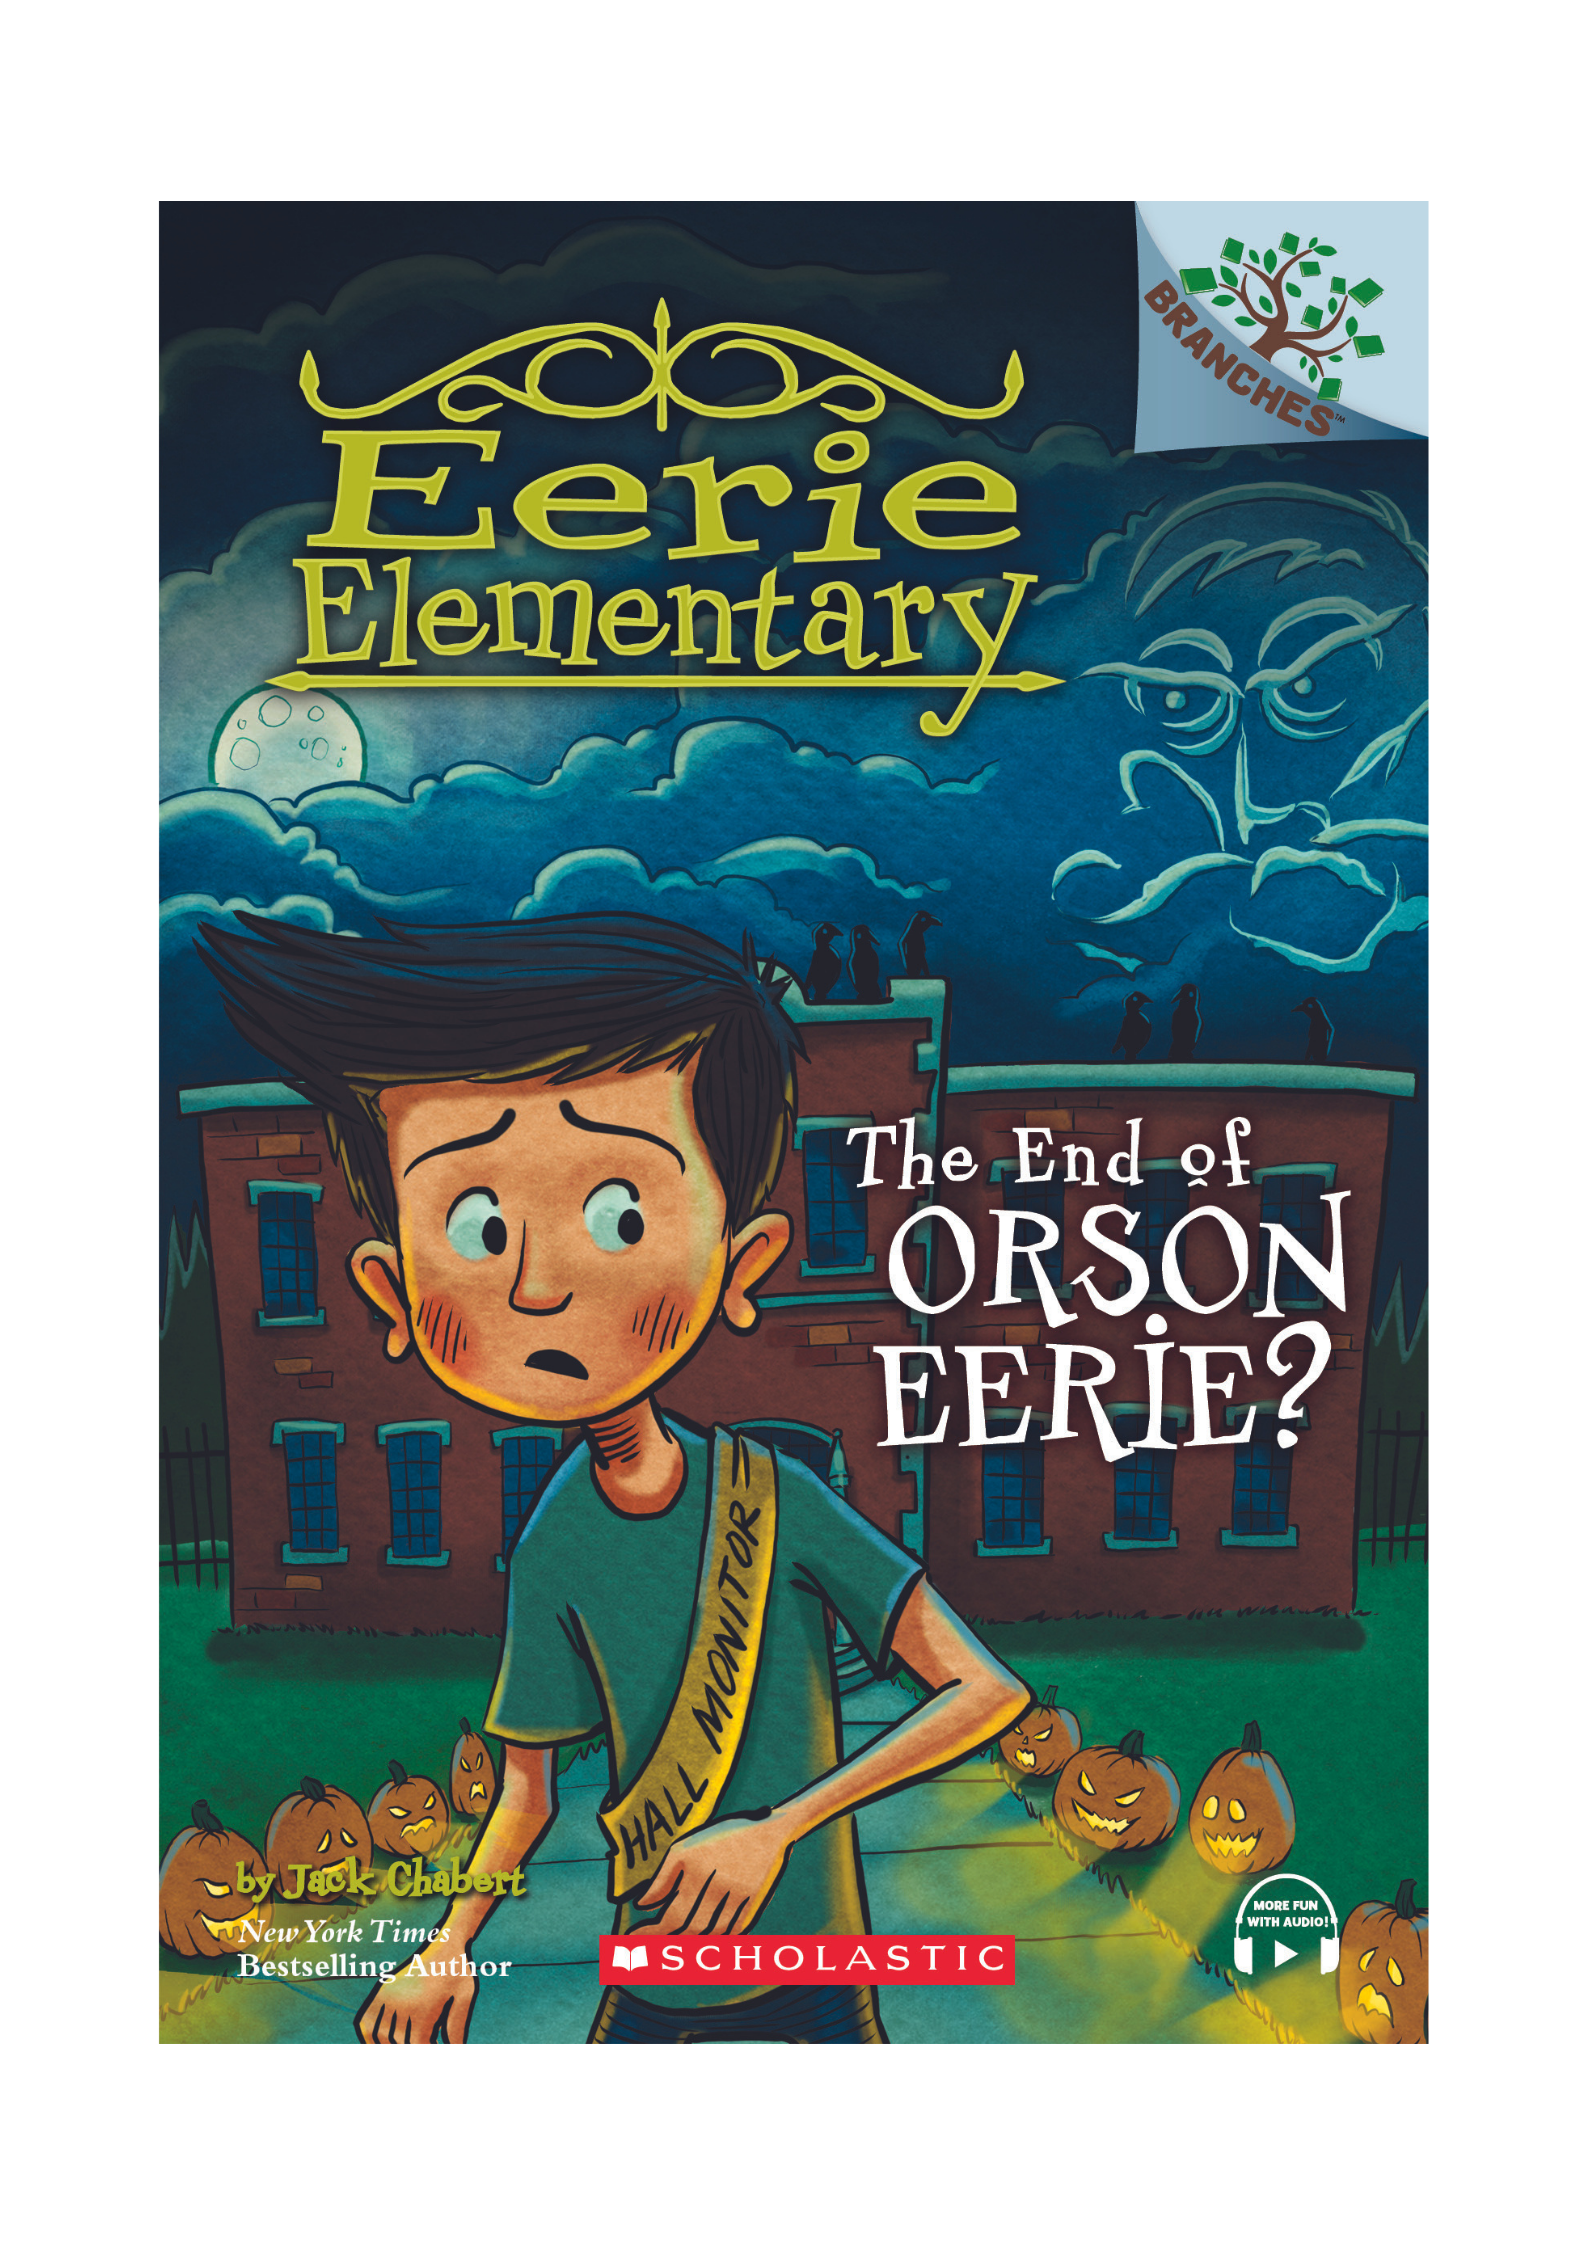 Branches – Eerie Elementary #10: The End of Orson Eerie?